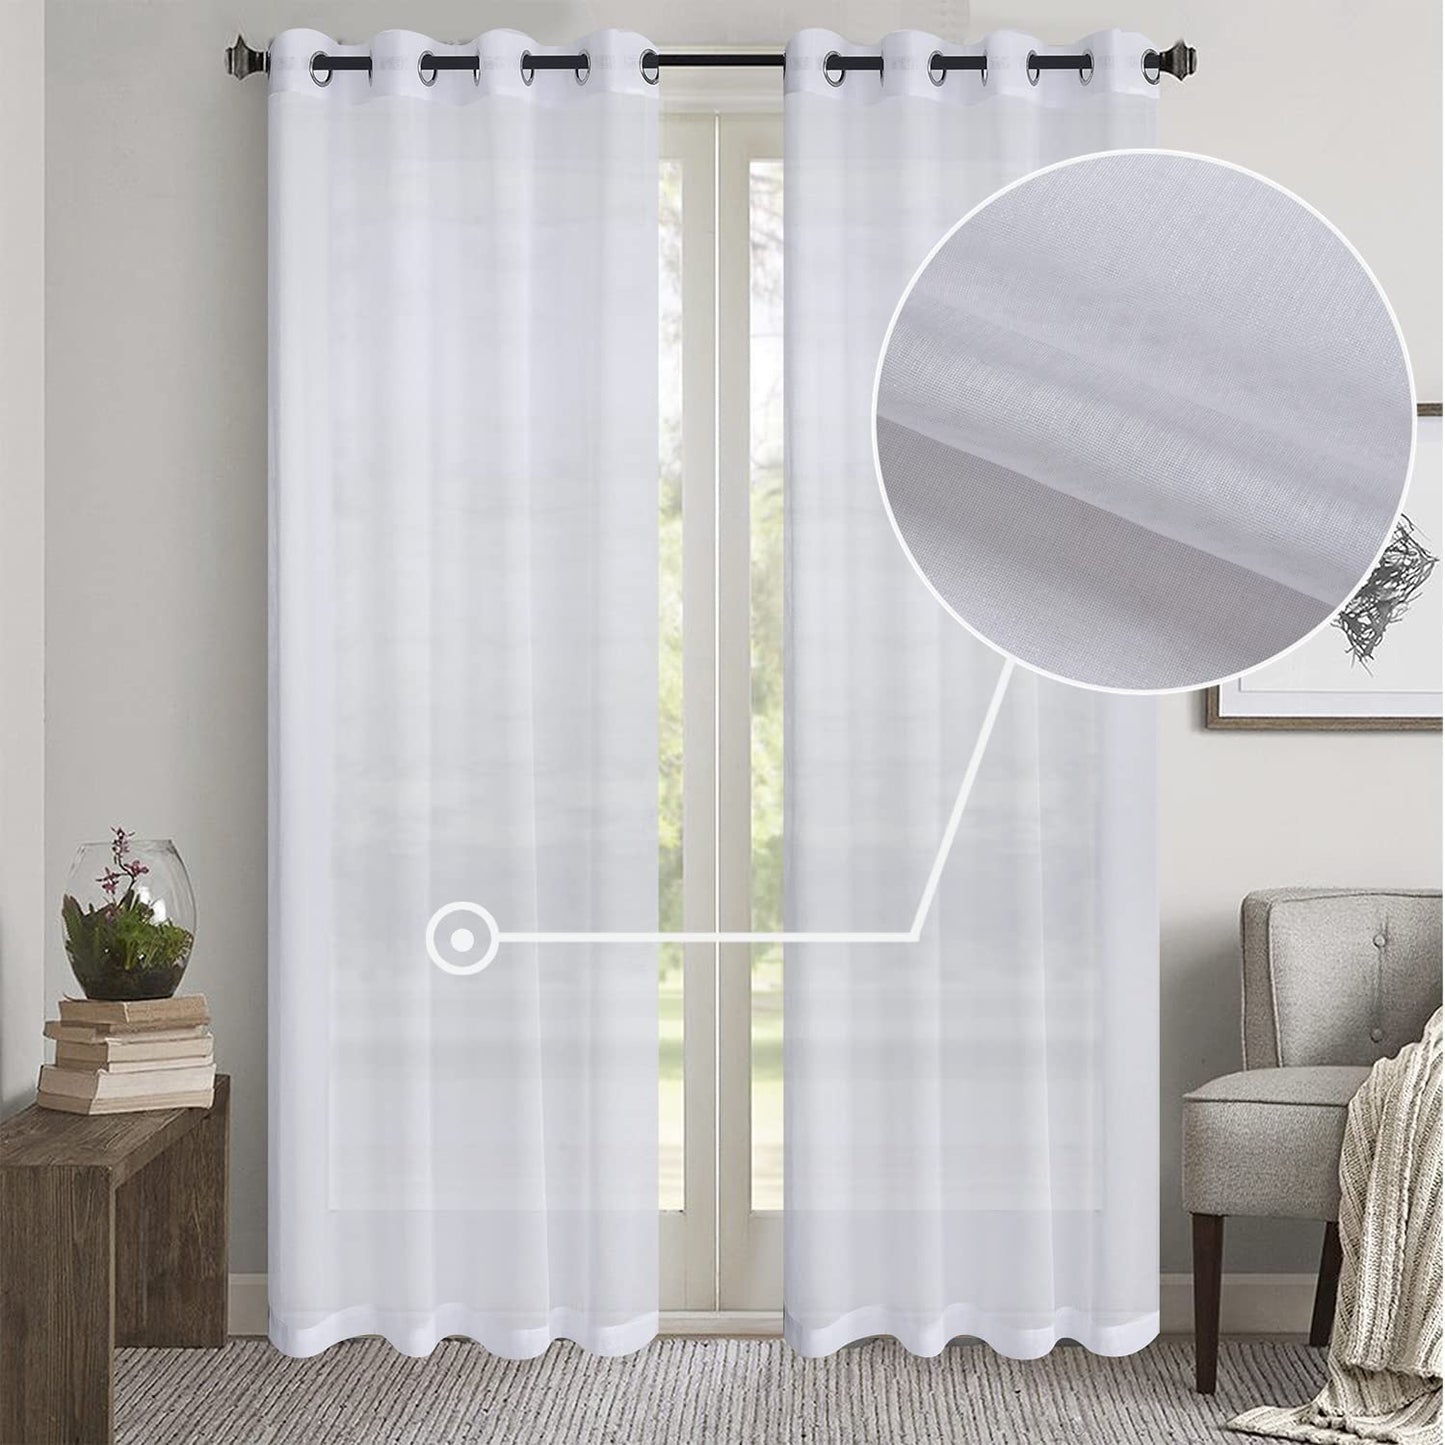 Semi Sheer Solid Voile Curtain Sunlight Filtering Protect Privacy Grommet Ring Top